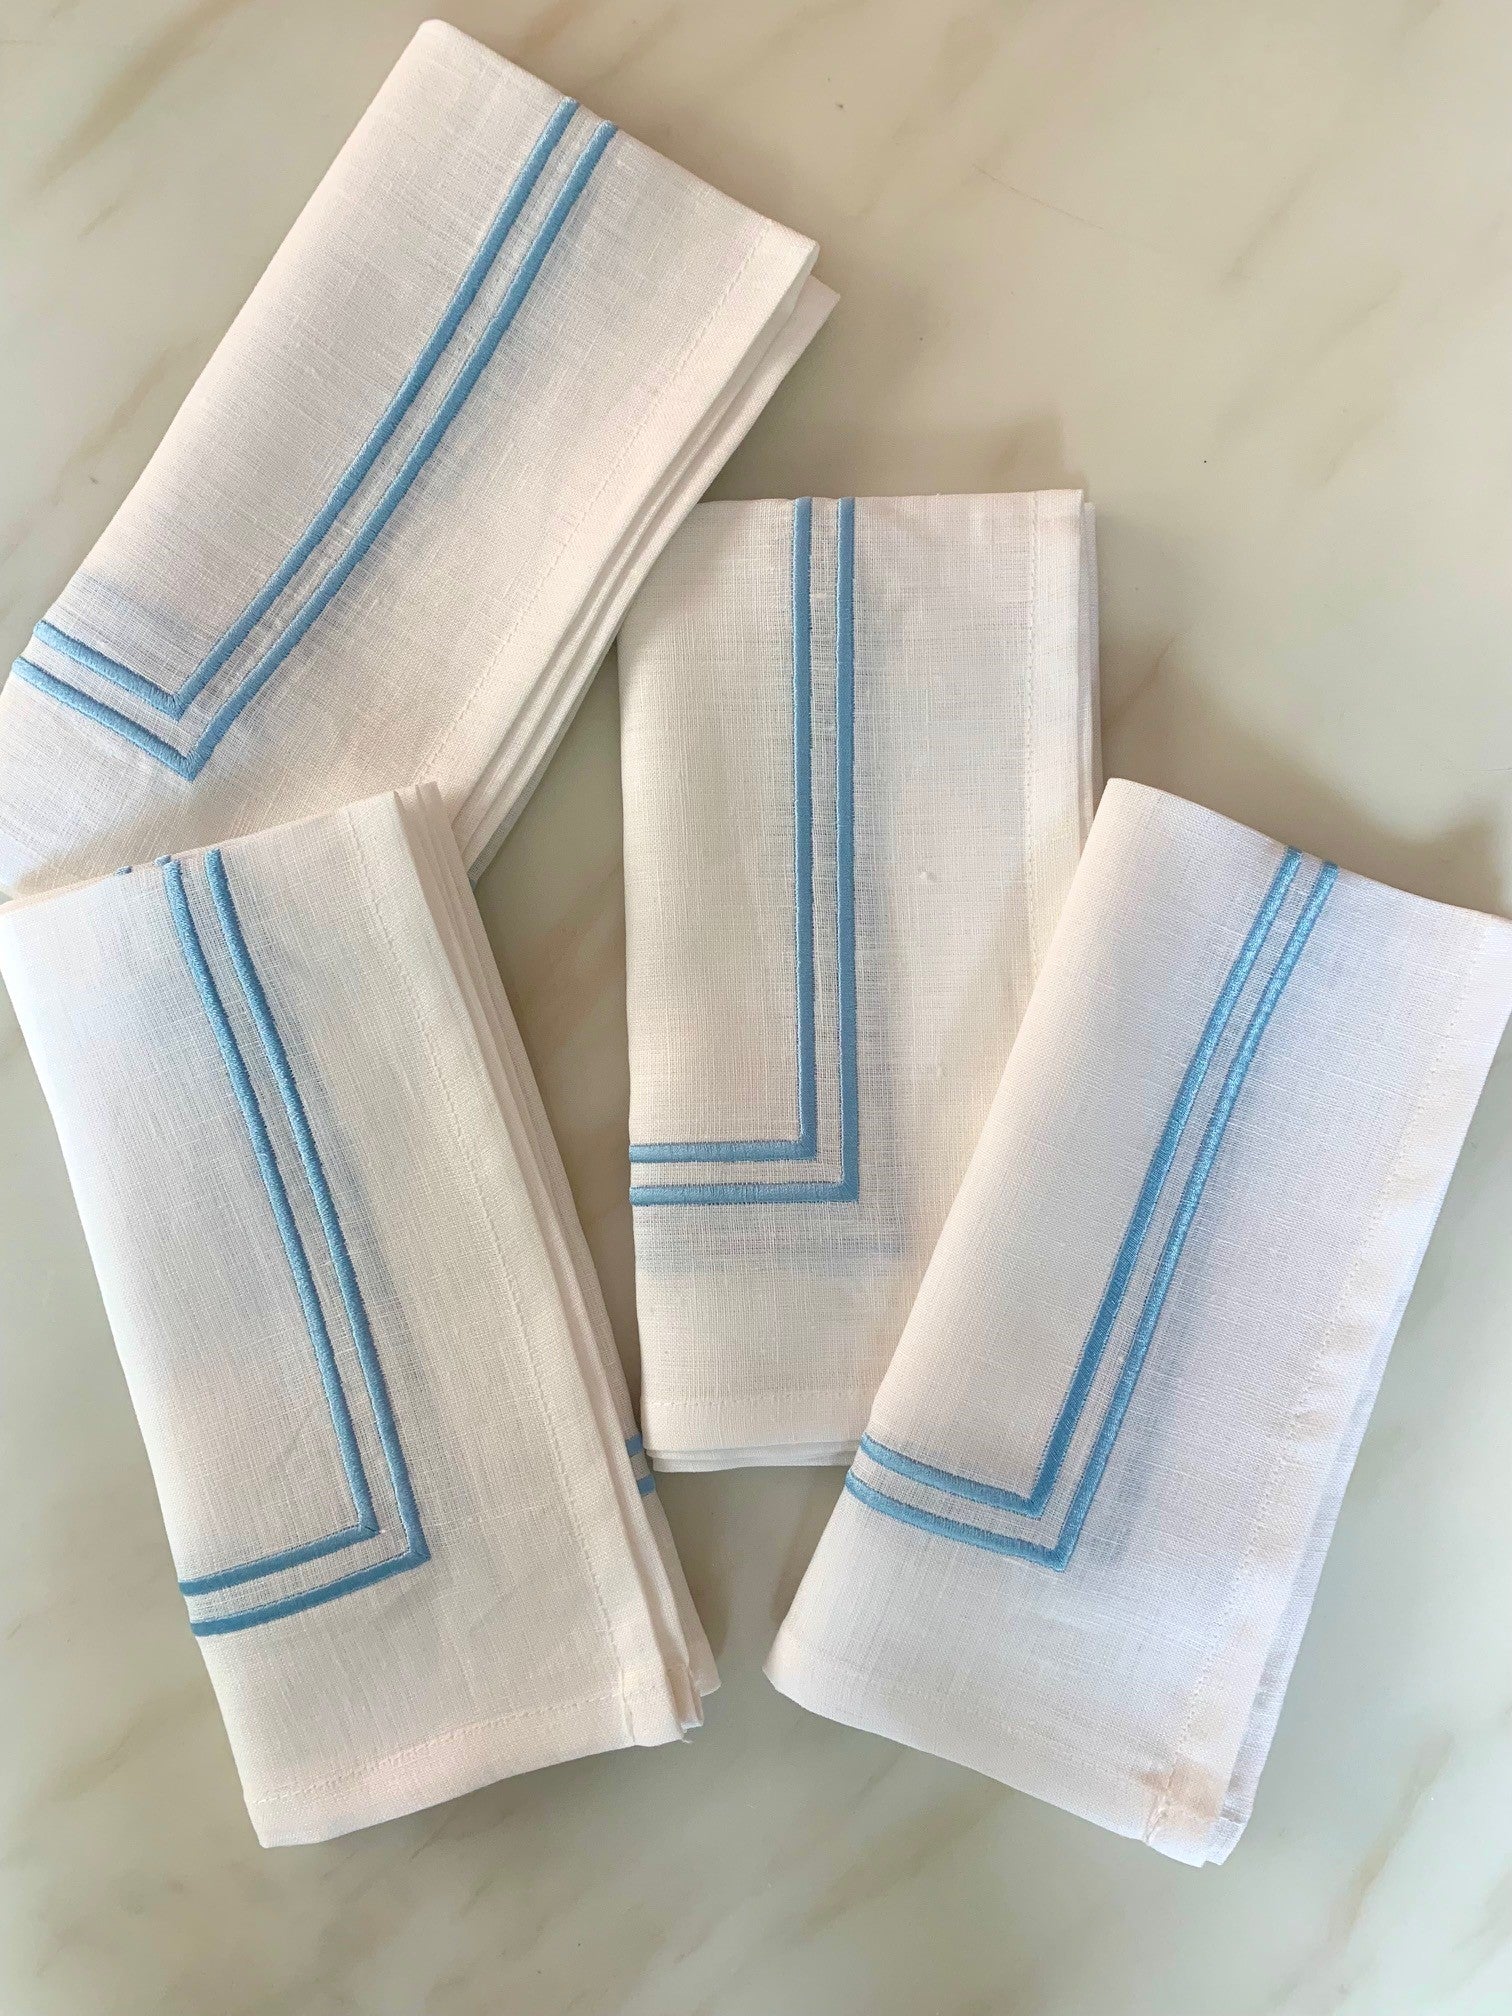 4 white linen napkins with double piped borders in sky blue